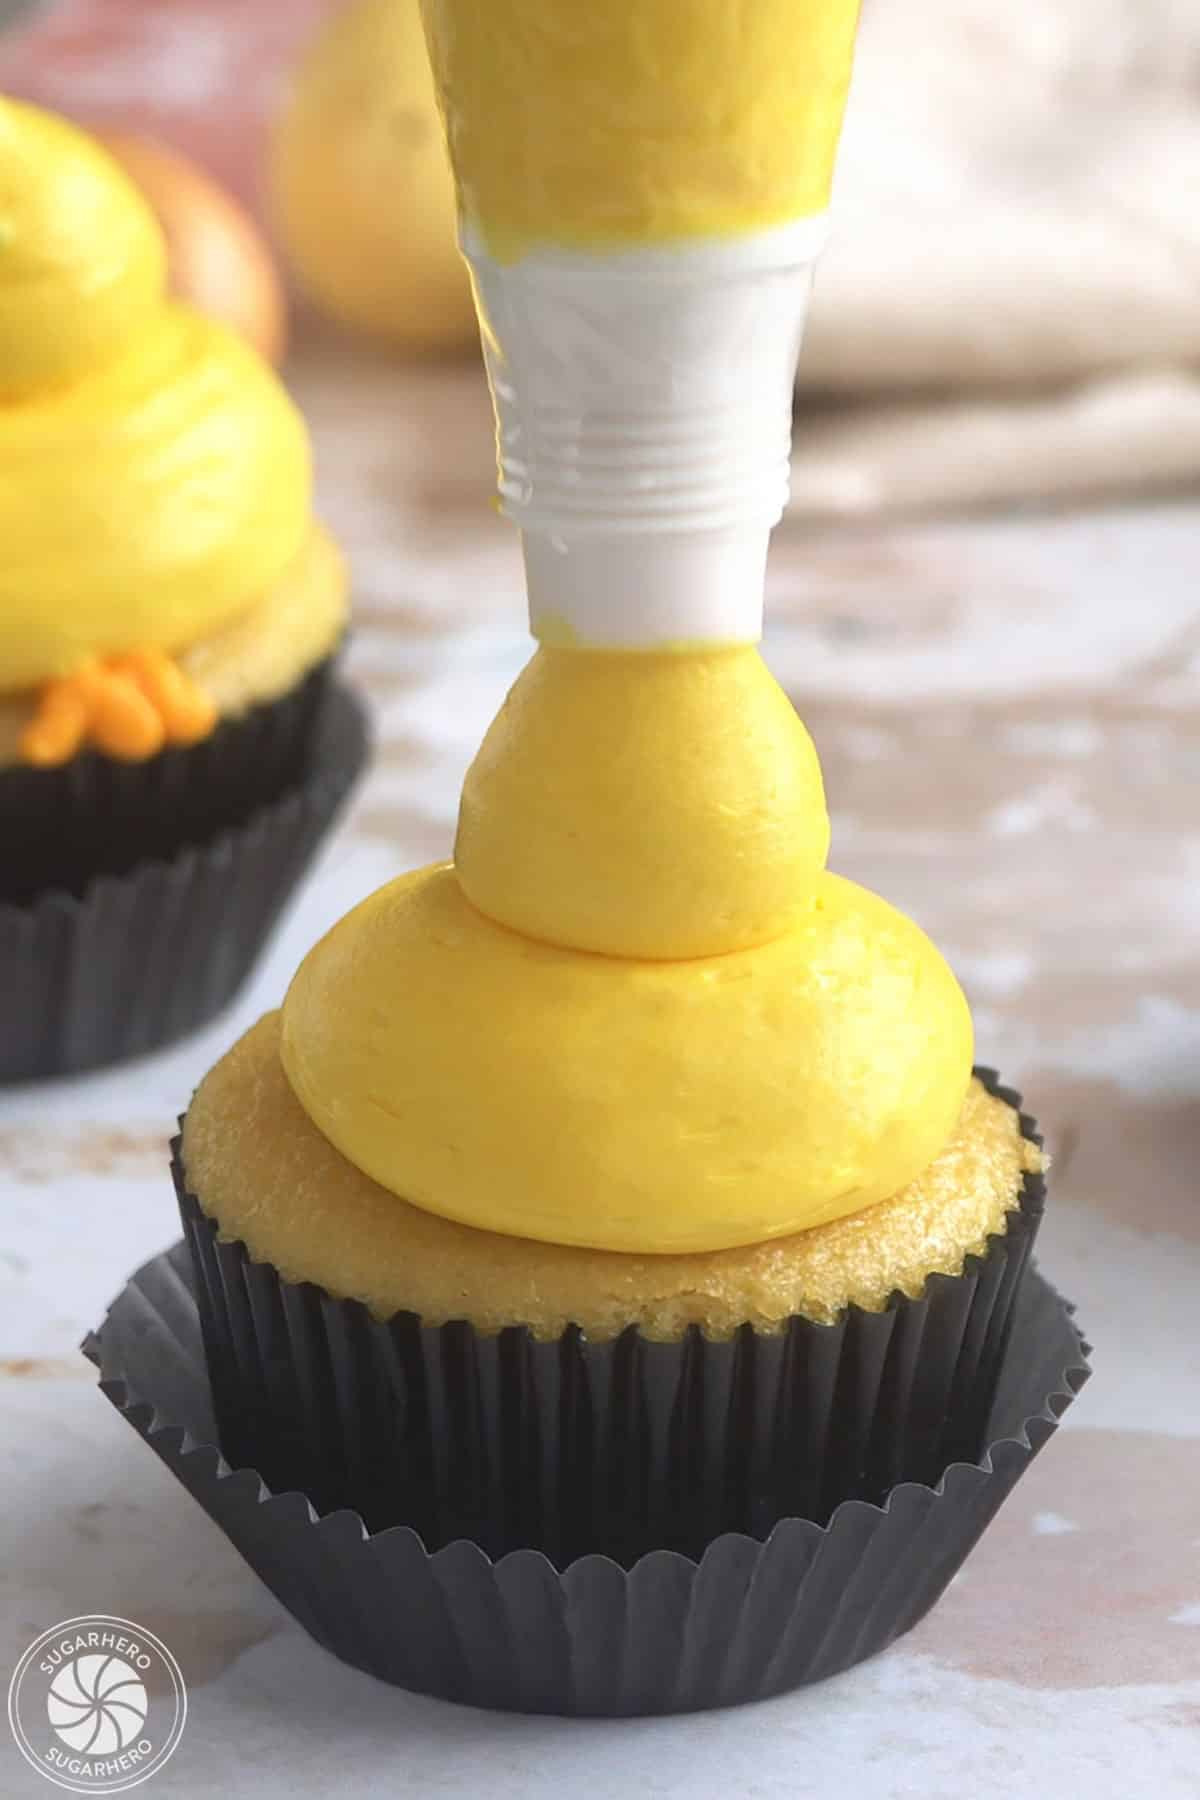 Adding a second buttercream dollop on top of a cupcake to make baby chick cupcakes.